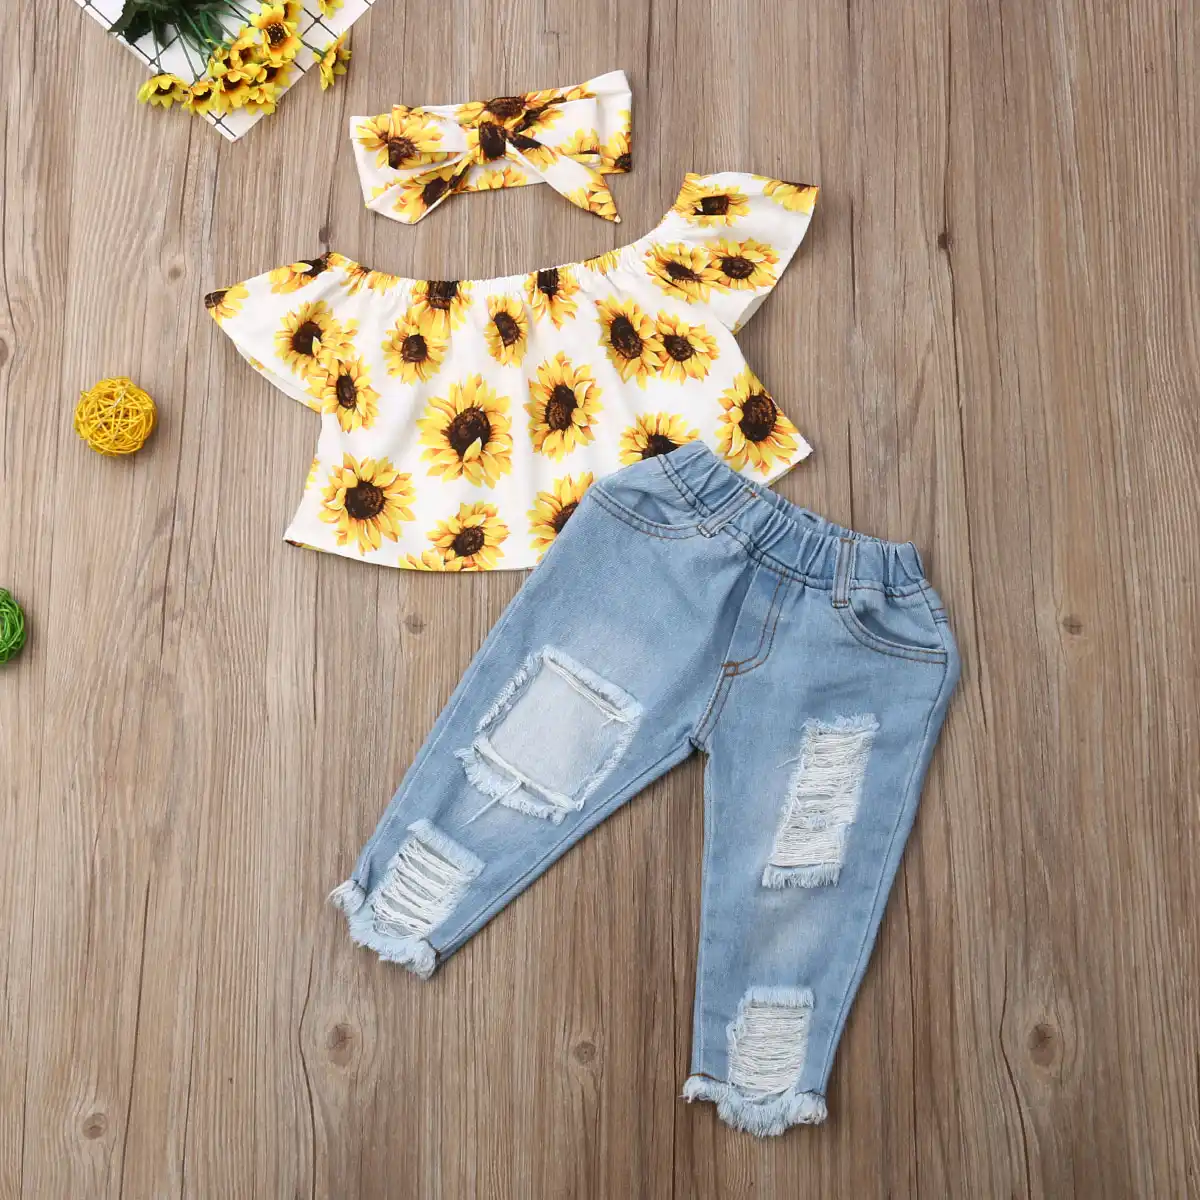 Toddler Baby Girls Clothes Off Shoulder Sunflower Tops Ruffle Blouse Ripped Denim Jeans Bowknot Headband 3Pcs Outfits